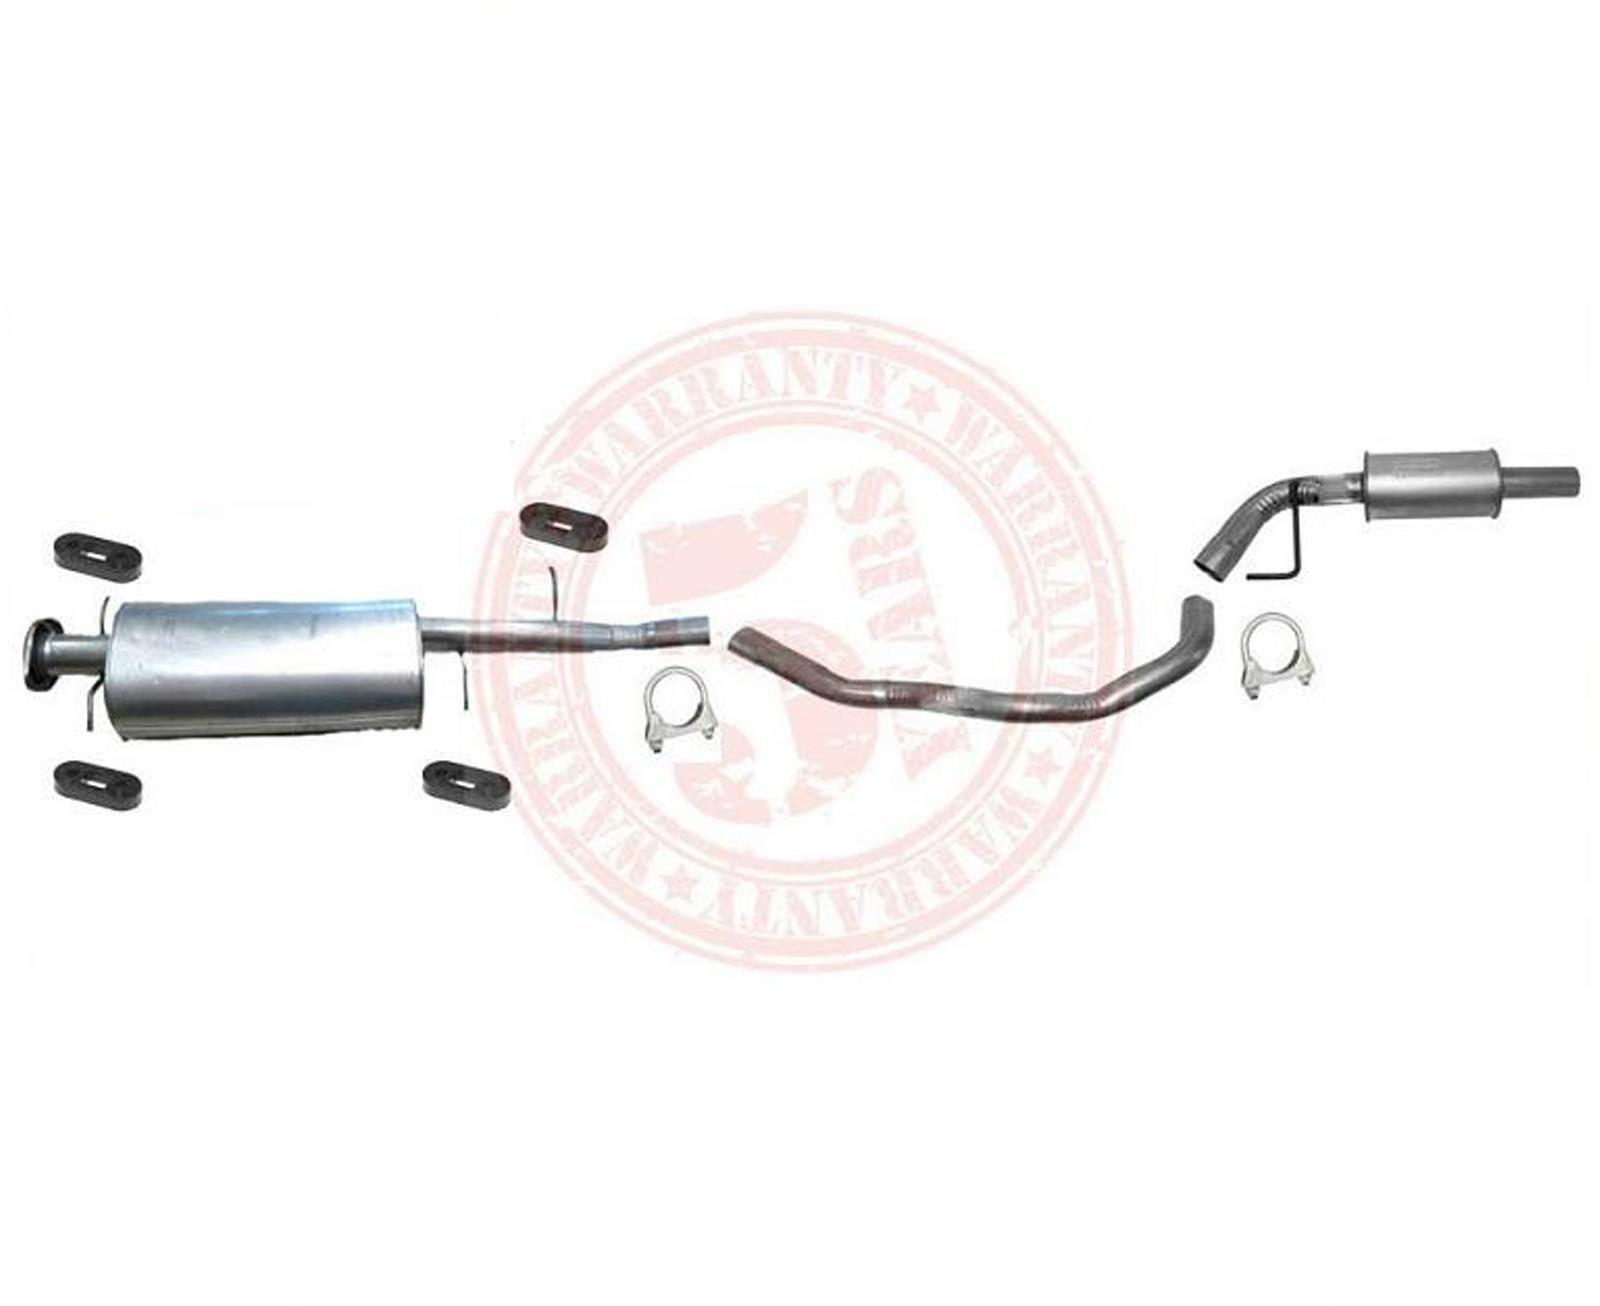 Full Exhaust System For Lincoln Navigator L Models 2007-2014 w 131